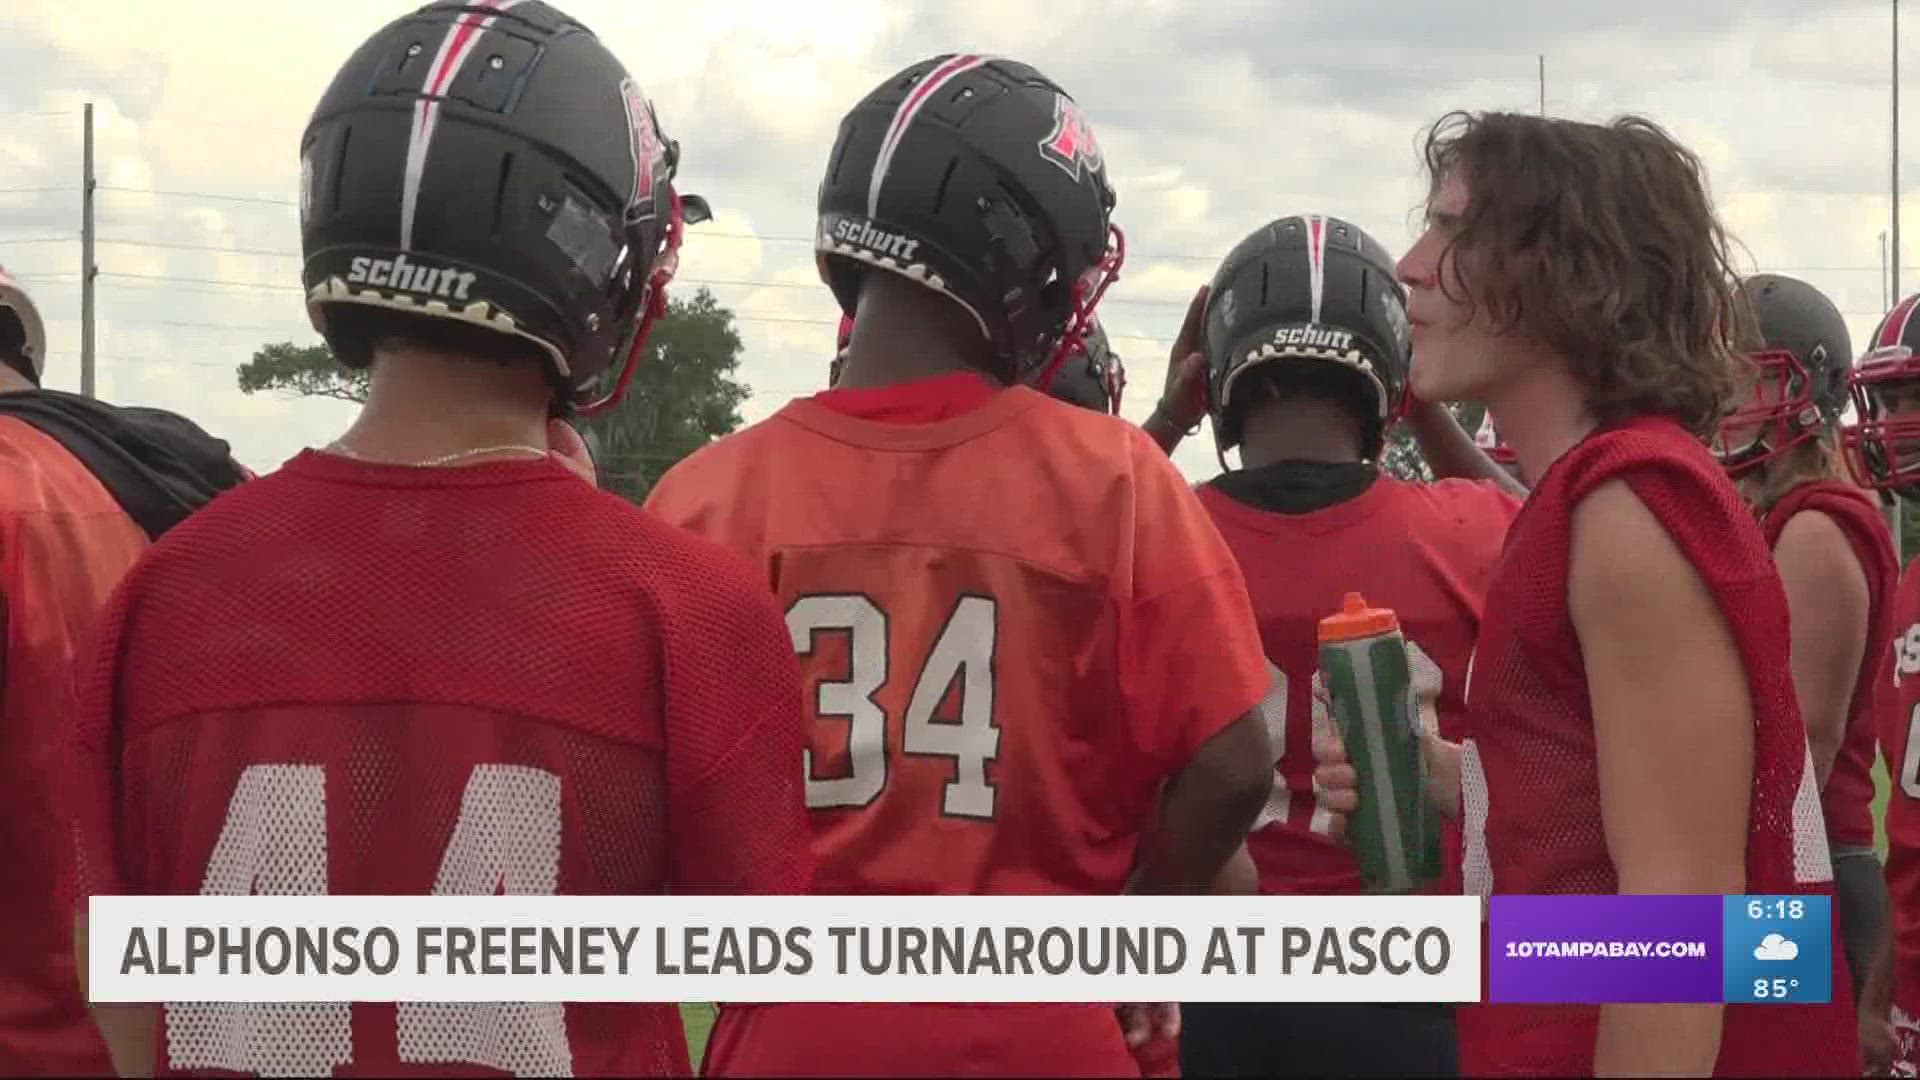 The Pirates are off to a 4-0 start under new head coach Alphonso Freeney.